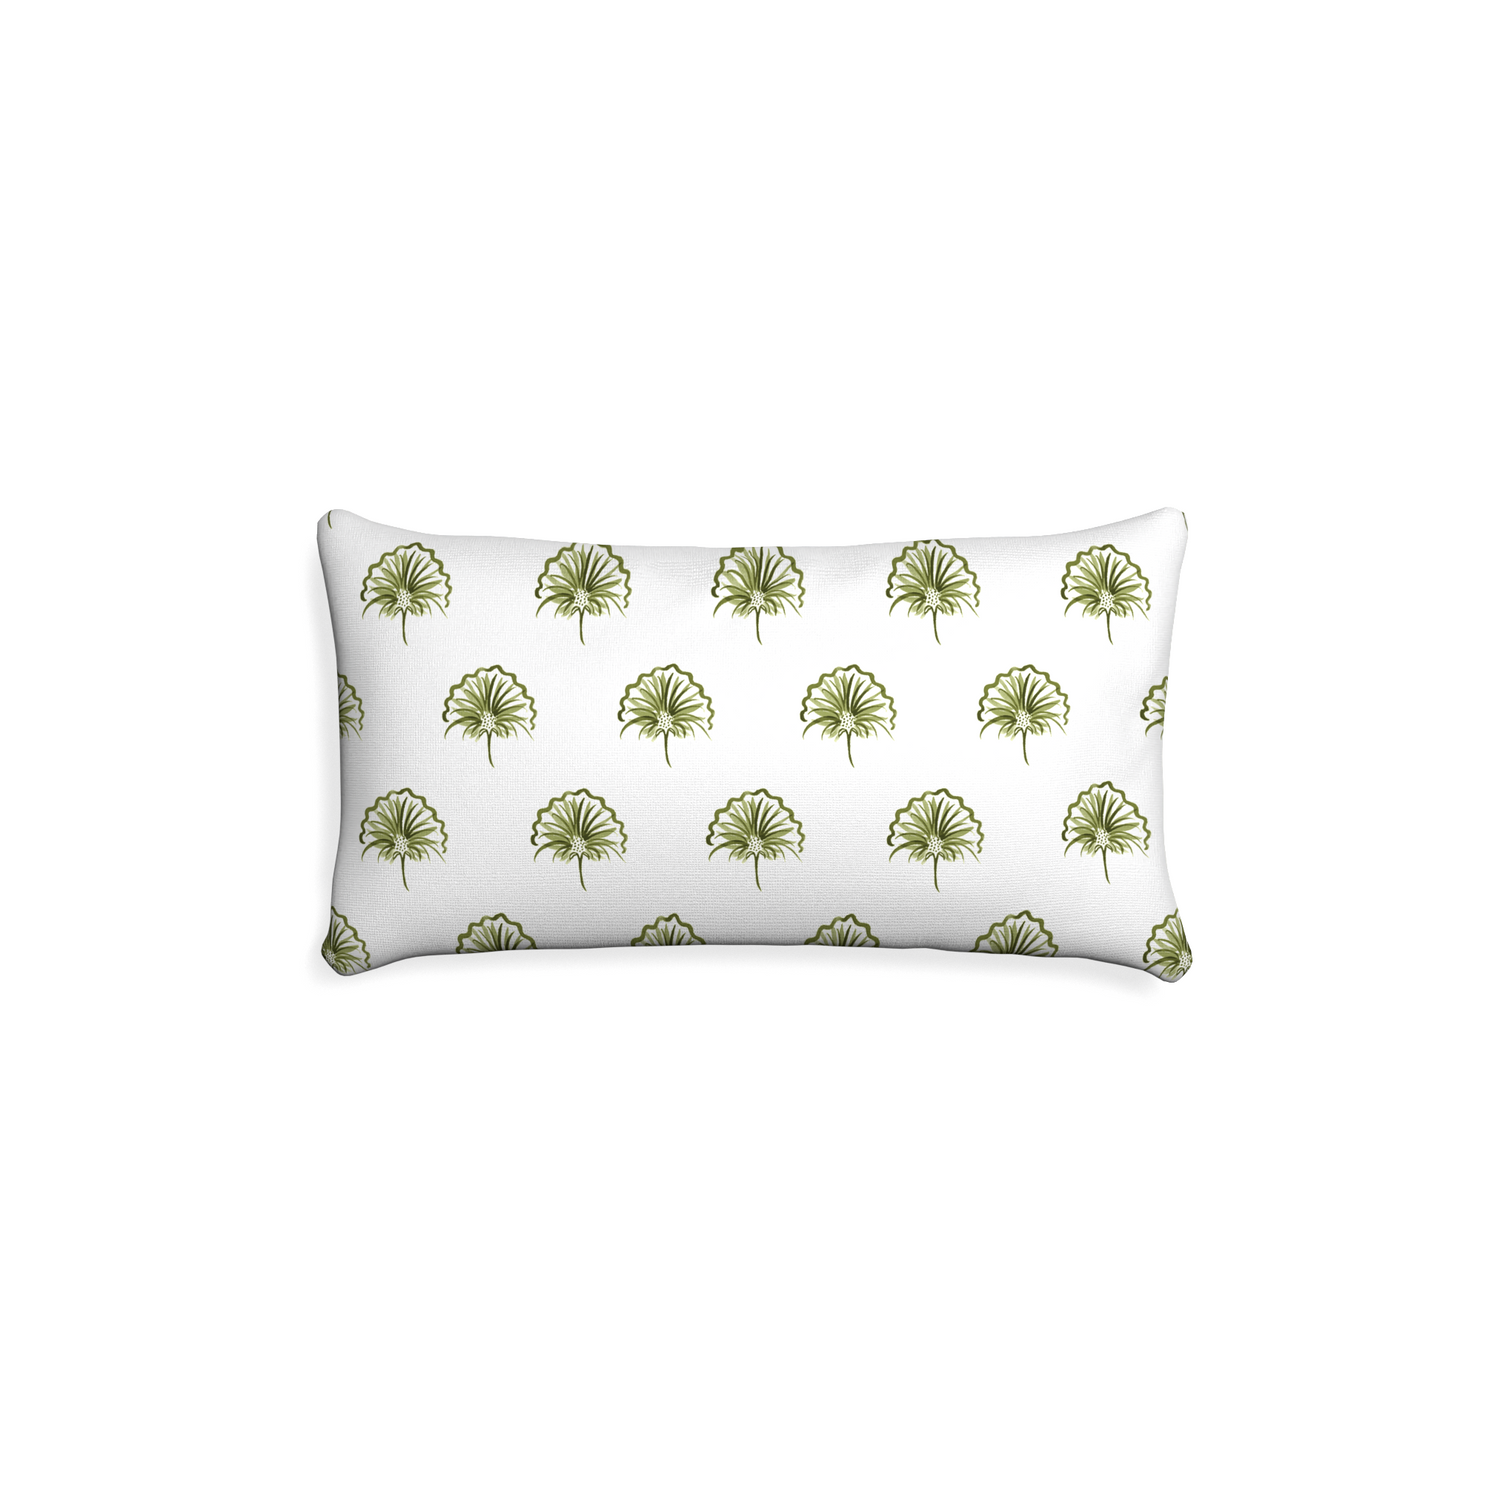 Petite-lumbar penelope moss custom green floralpillow with none on white background